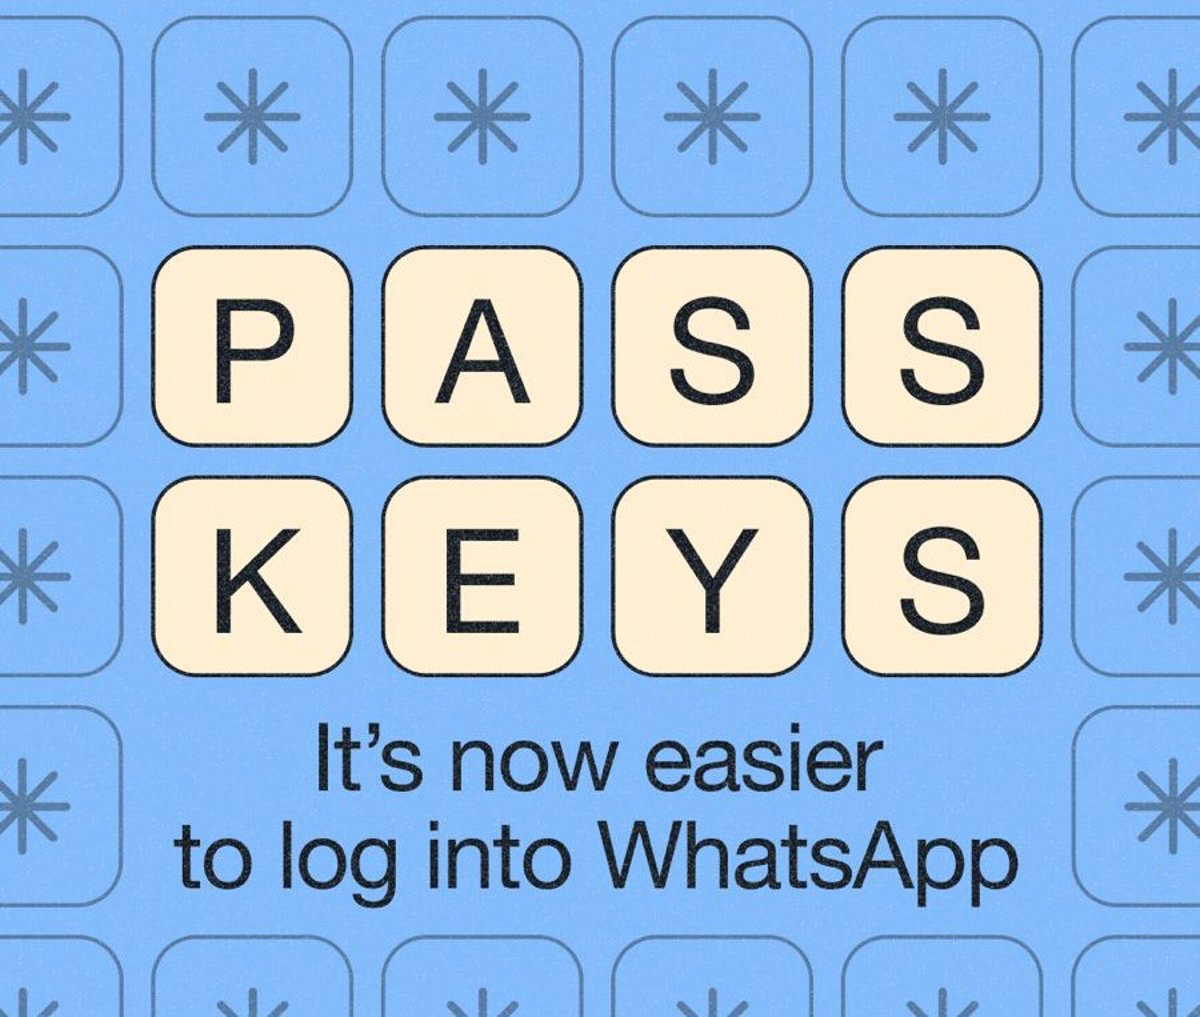 WhatsApp Introduces New ‘Passkeys’ Feature for iOS Devices, Enhancing Security and Convenience